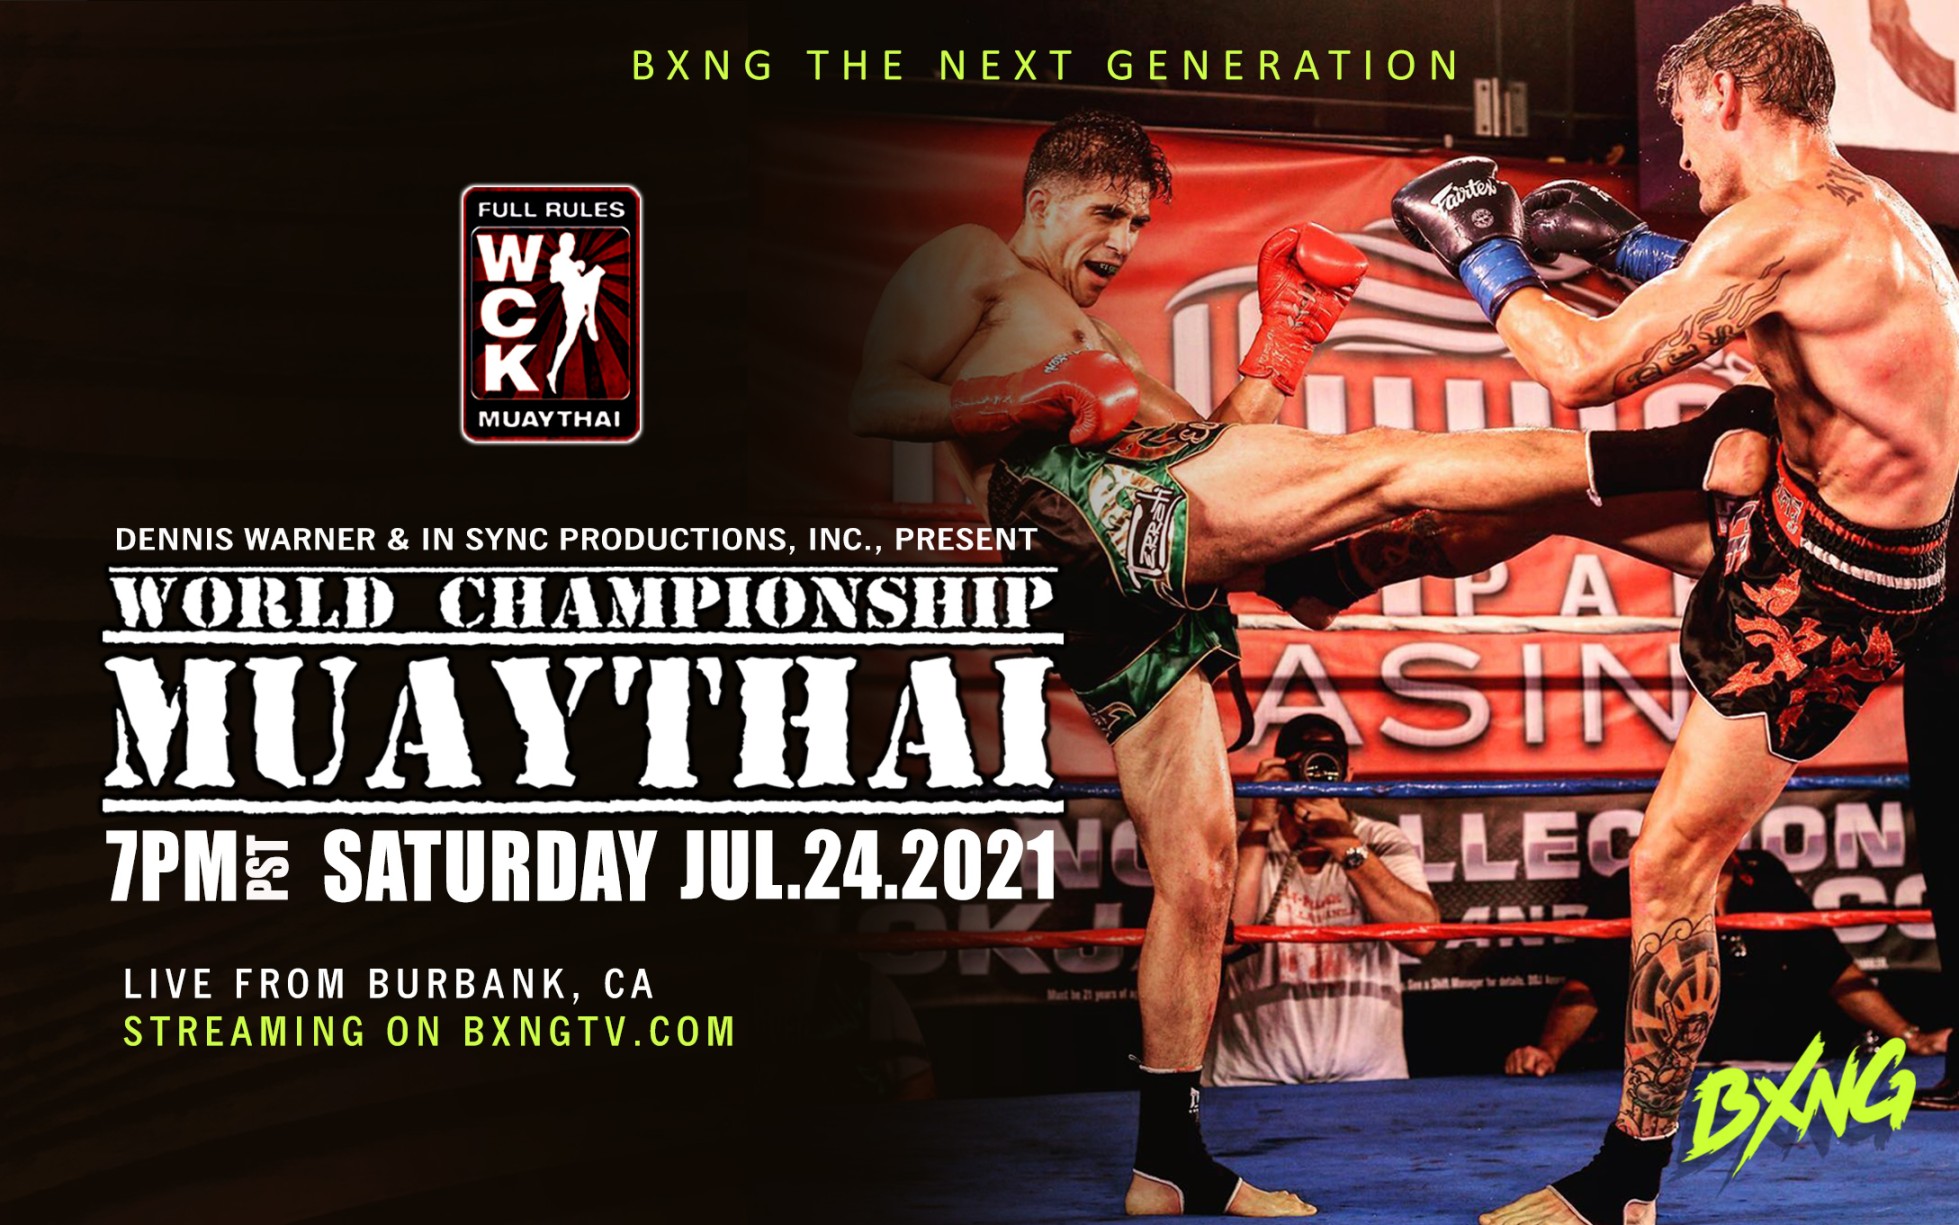 BXNG Presents Muay Thais big 30th Anniversary Event, 7/24 at 7PM Live From Burbank, CA